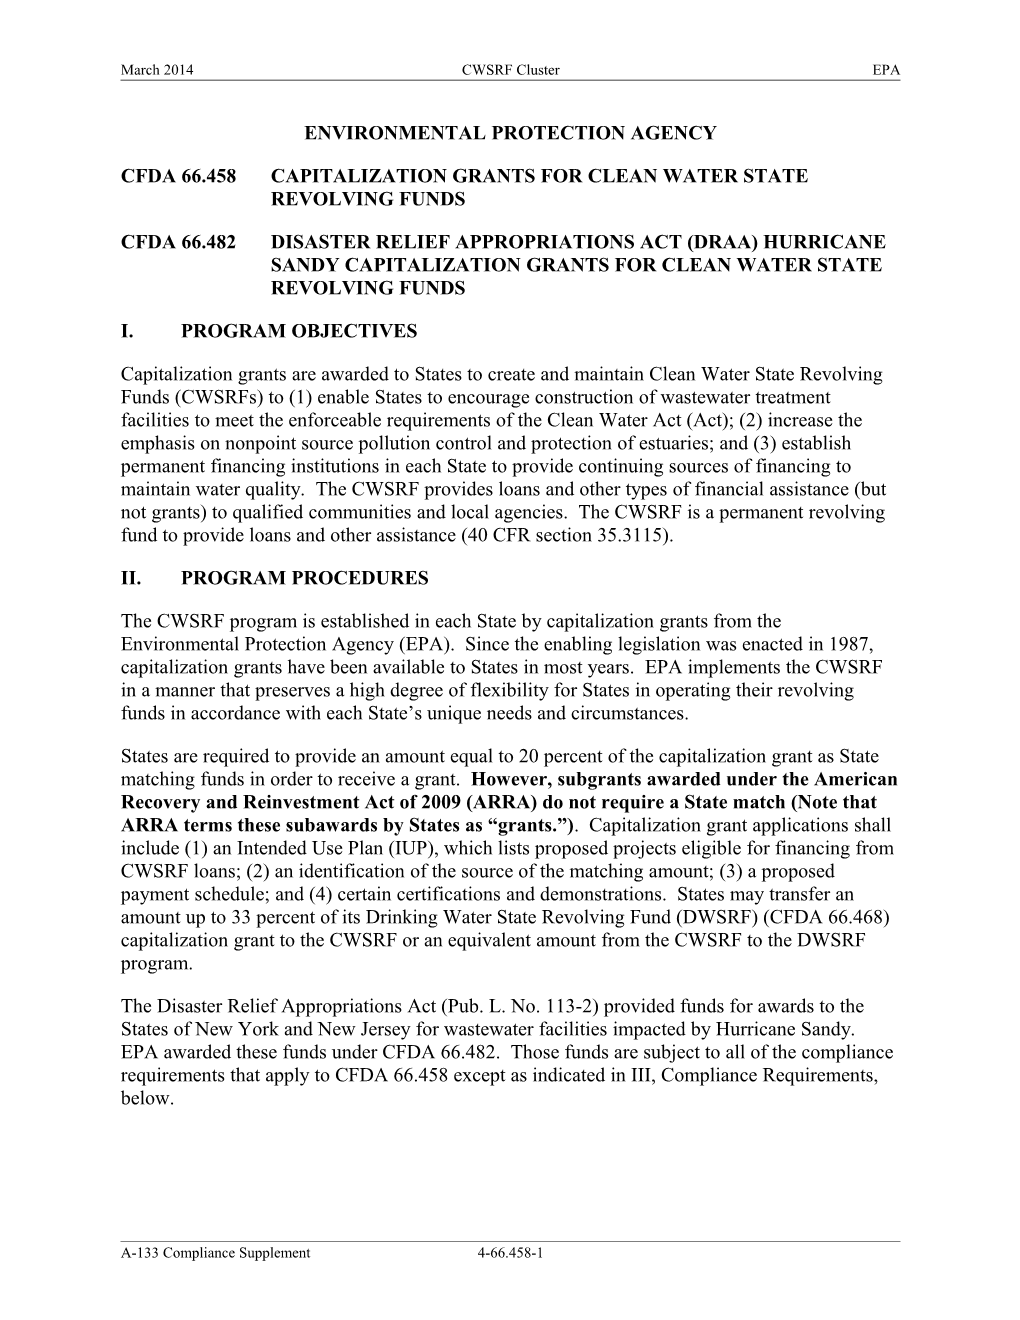 Cfda 66.458 Capitalization Grants for Clean Water State Revolving Funds